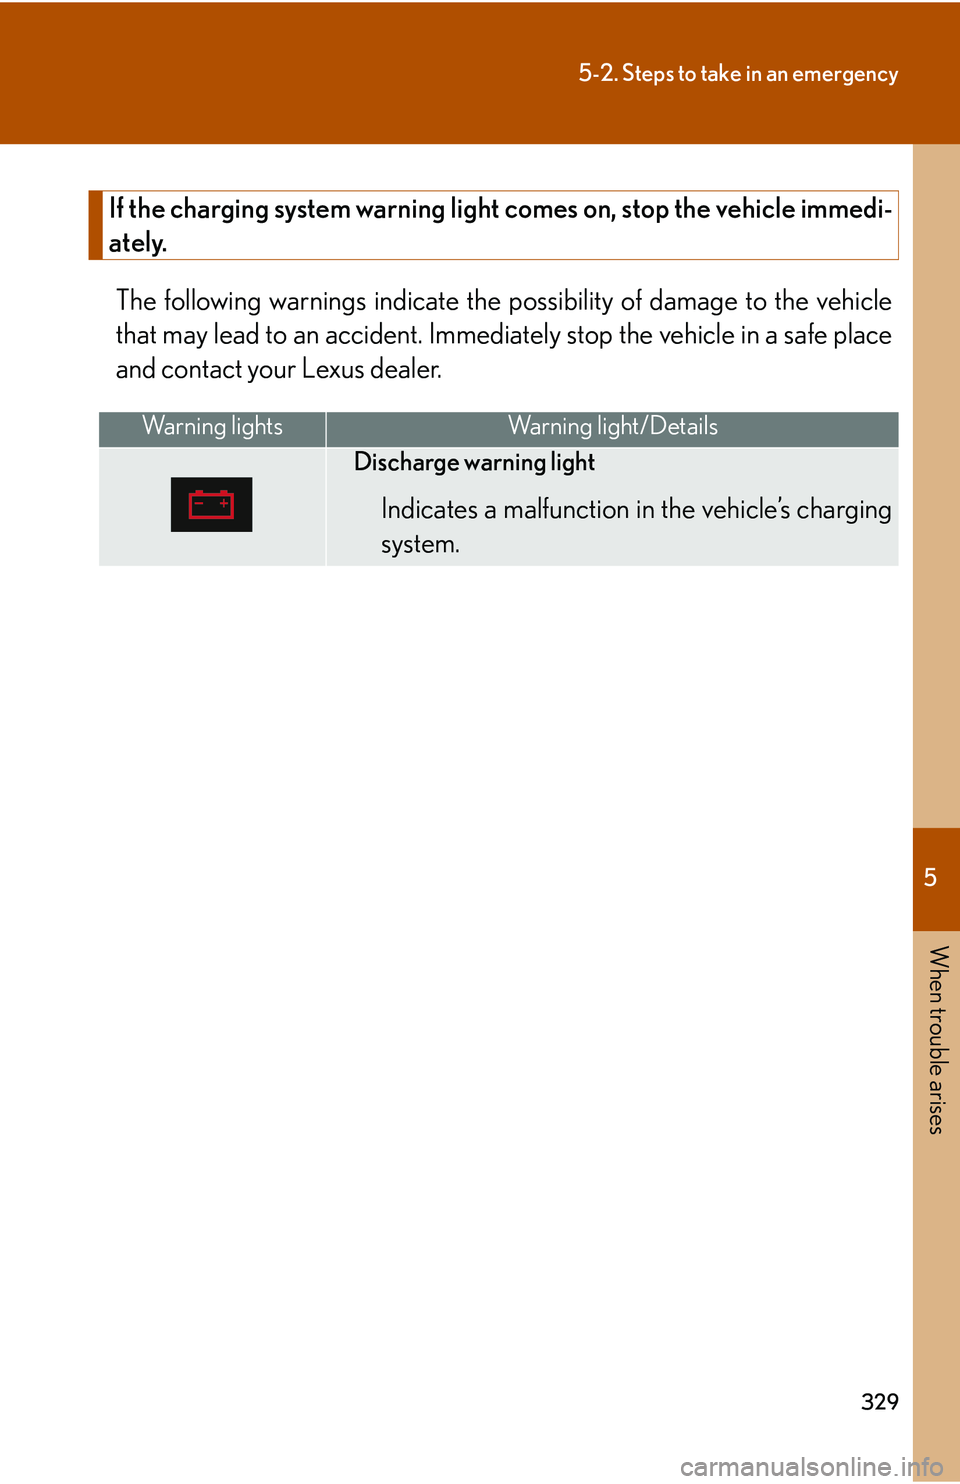 LEXUS LS430 2006  Owners Manual 5
When trouble arises
329
5-2. Steps to take in an emergency
If the charging system warning light comes on, stop the vehicle immedi-
ately.
The following warnings indicate the pos
 sibility of damage 